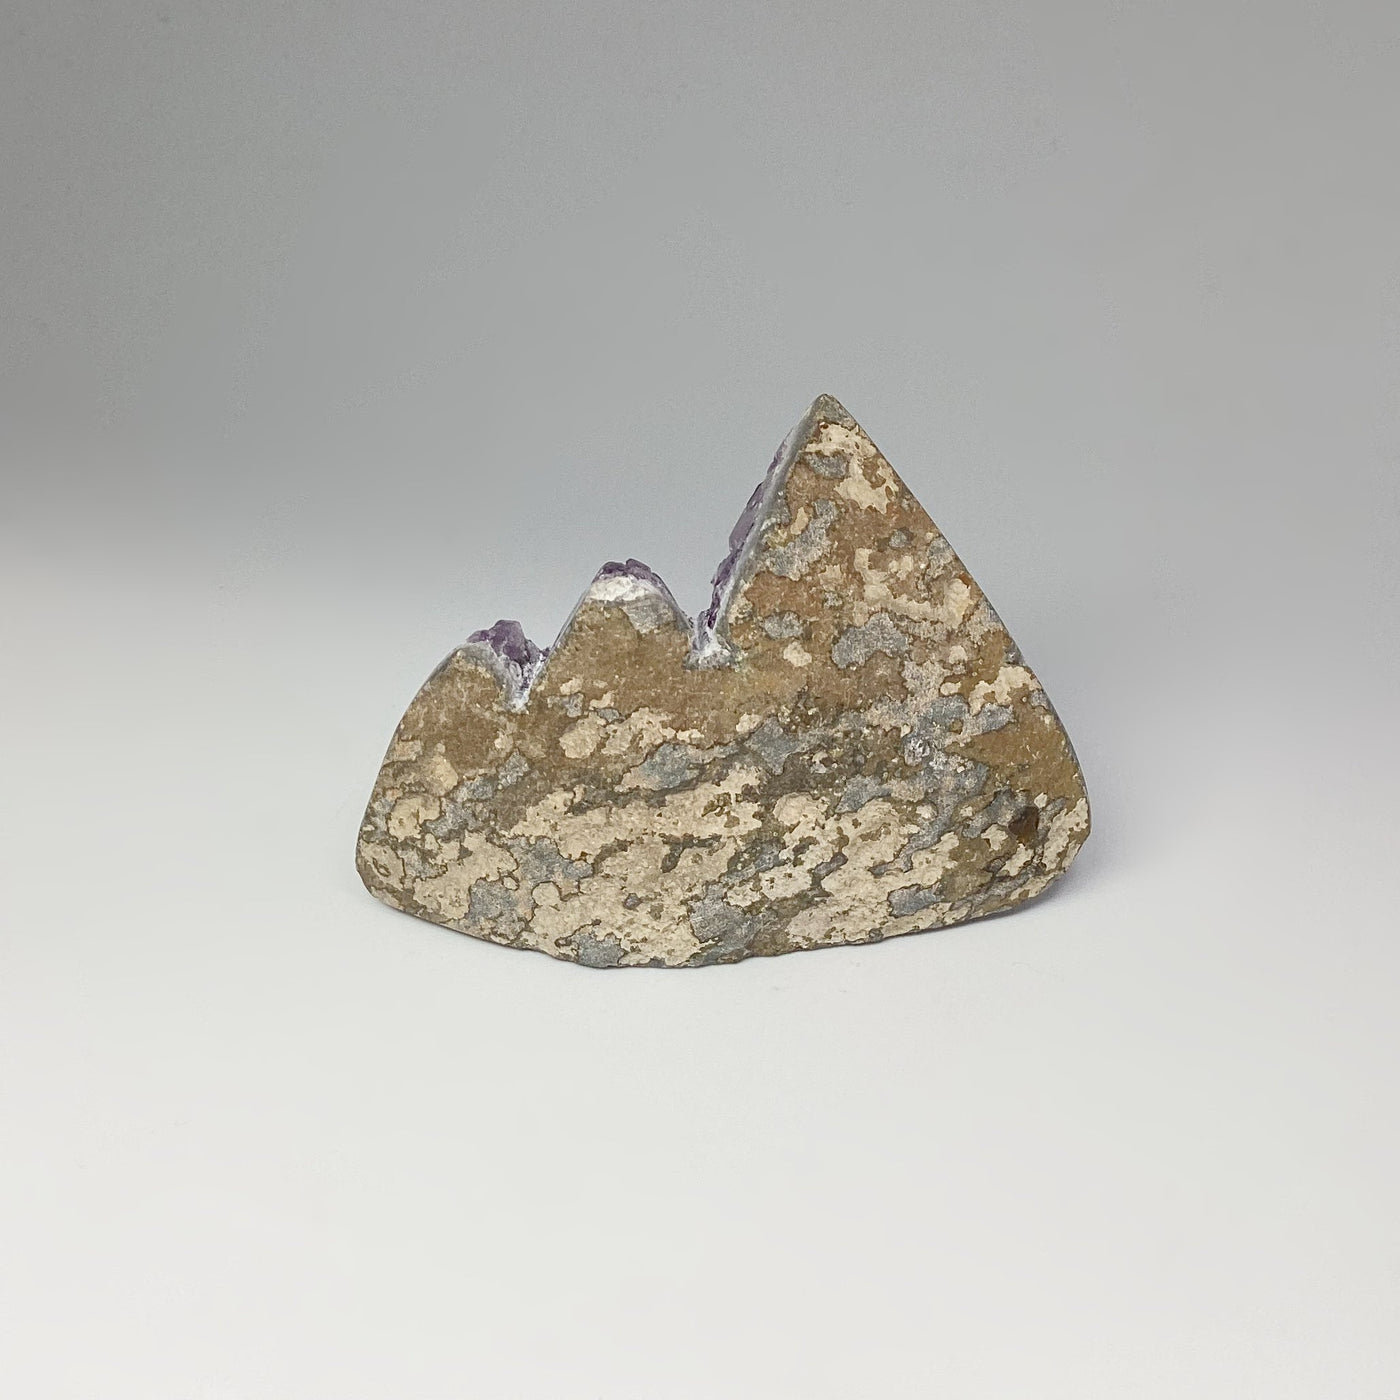 Amethyst Druze Cluster Mountain Carving